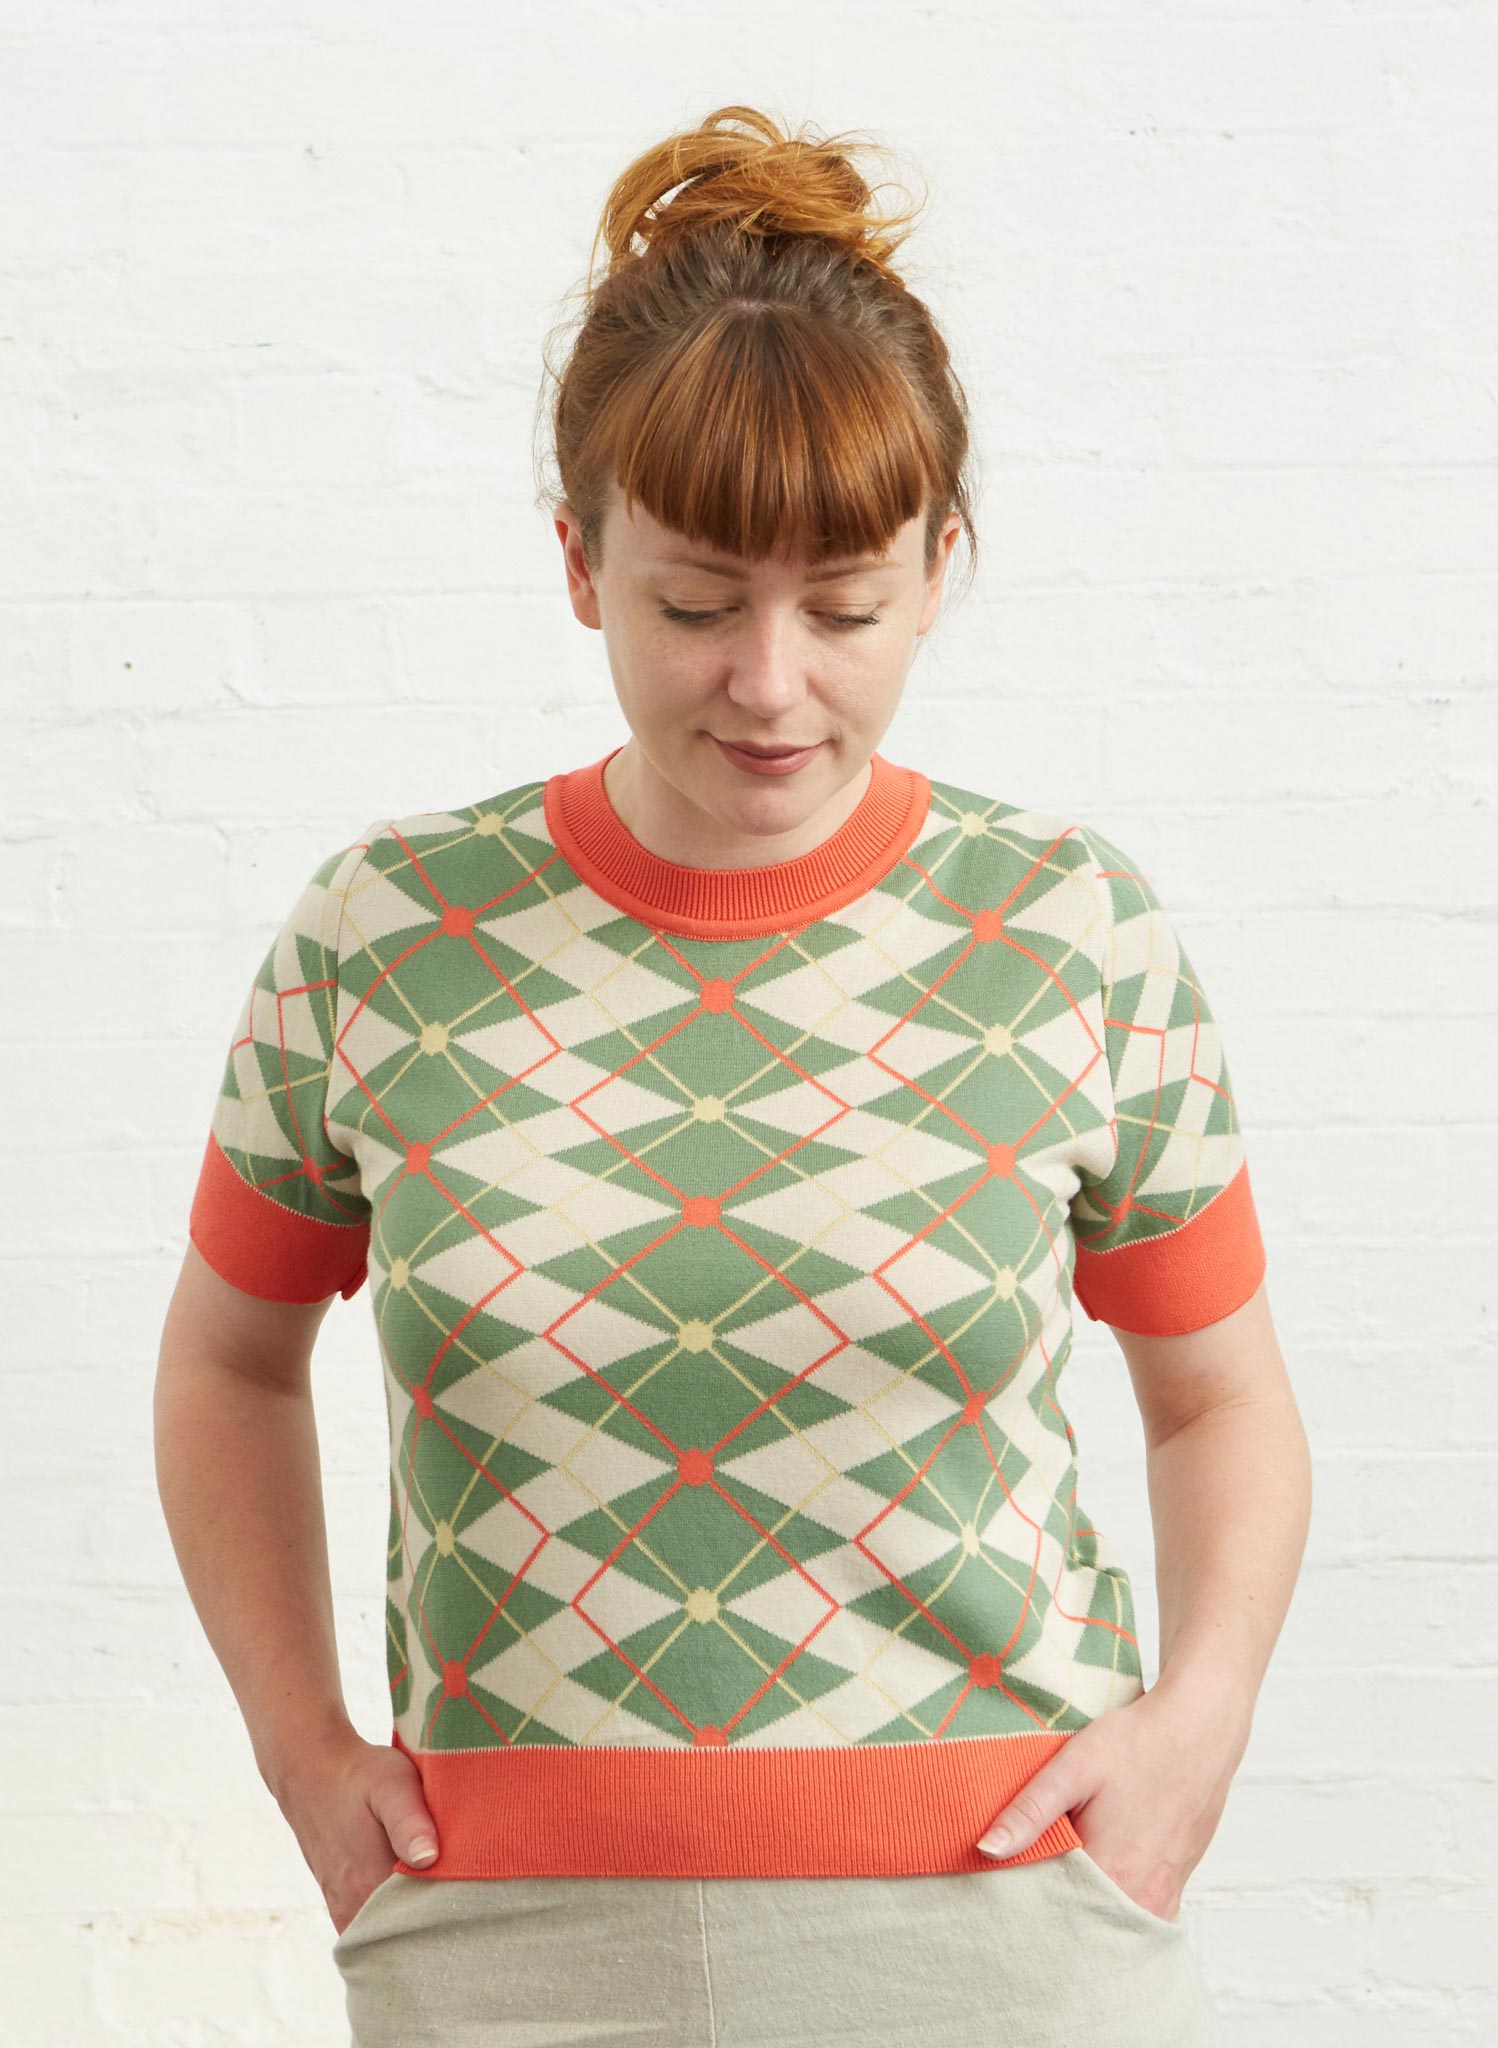 Palava Eve Knitted top  - Argyle Green Cream and Coral in Organic Cotton